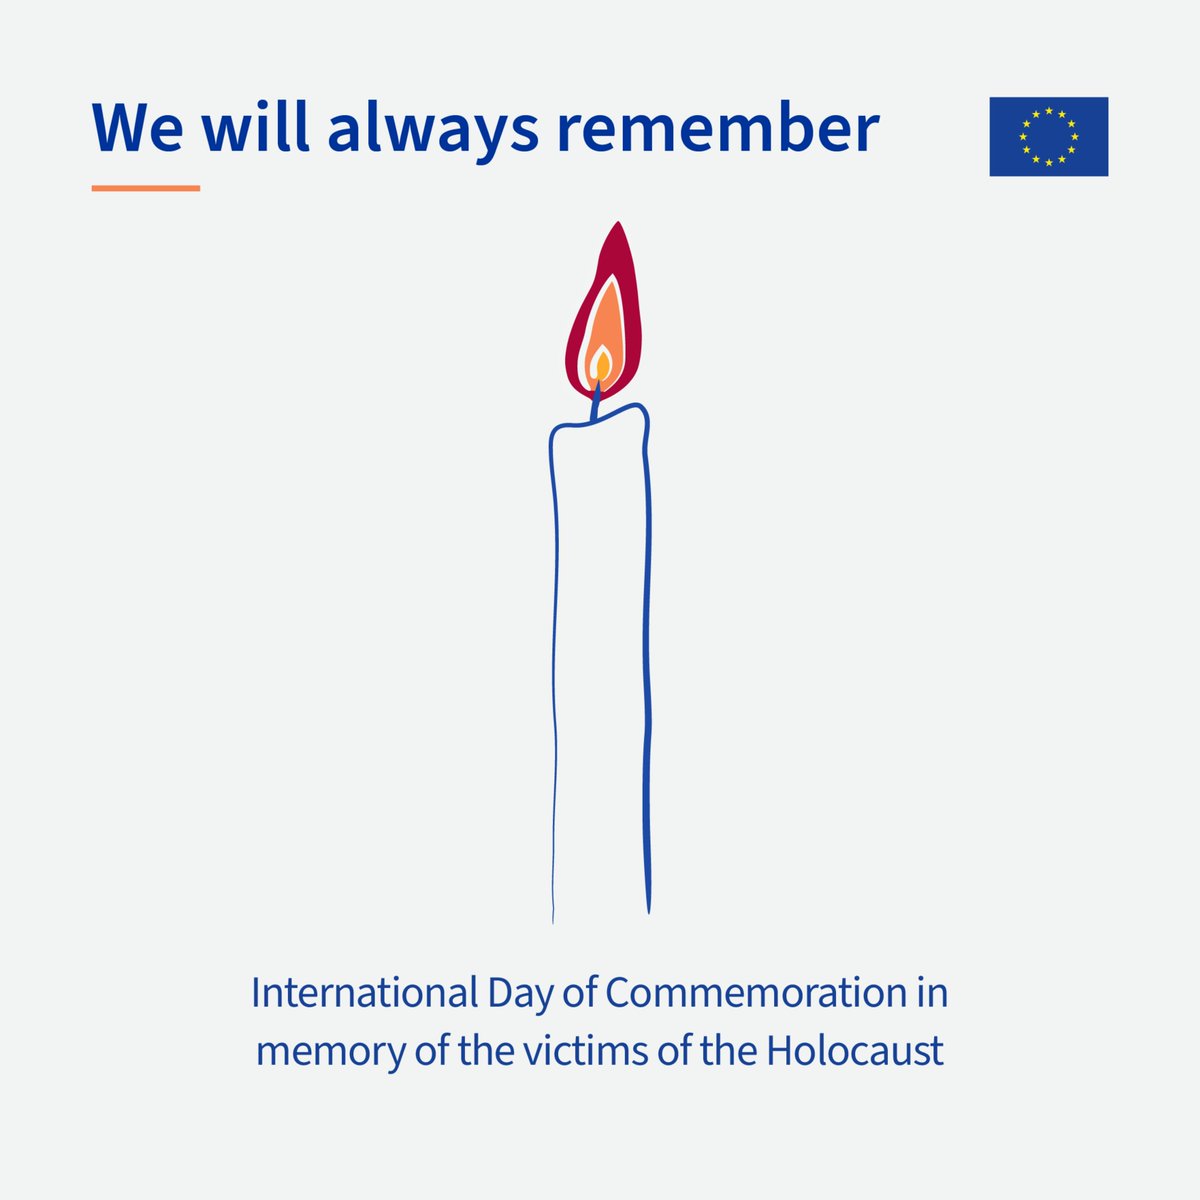 Today, we pay tribute to the victims of the Holocaust.

The EU and the Belgian Presidency stand firmly against antisemitism, racism and other forms of intolerance. 

#WeRemember #HolocaustRemembrance